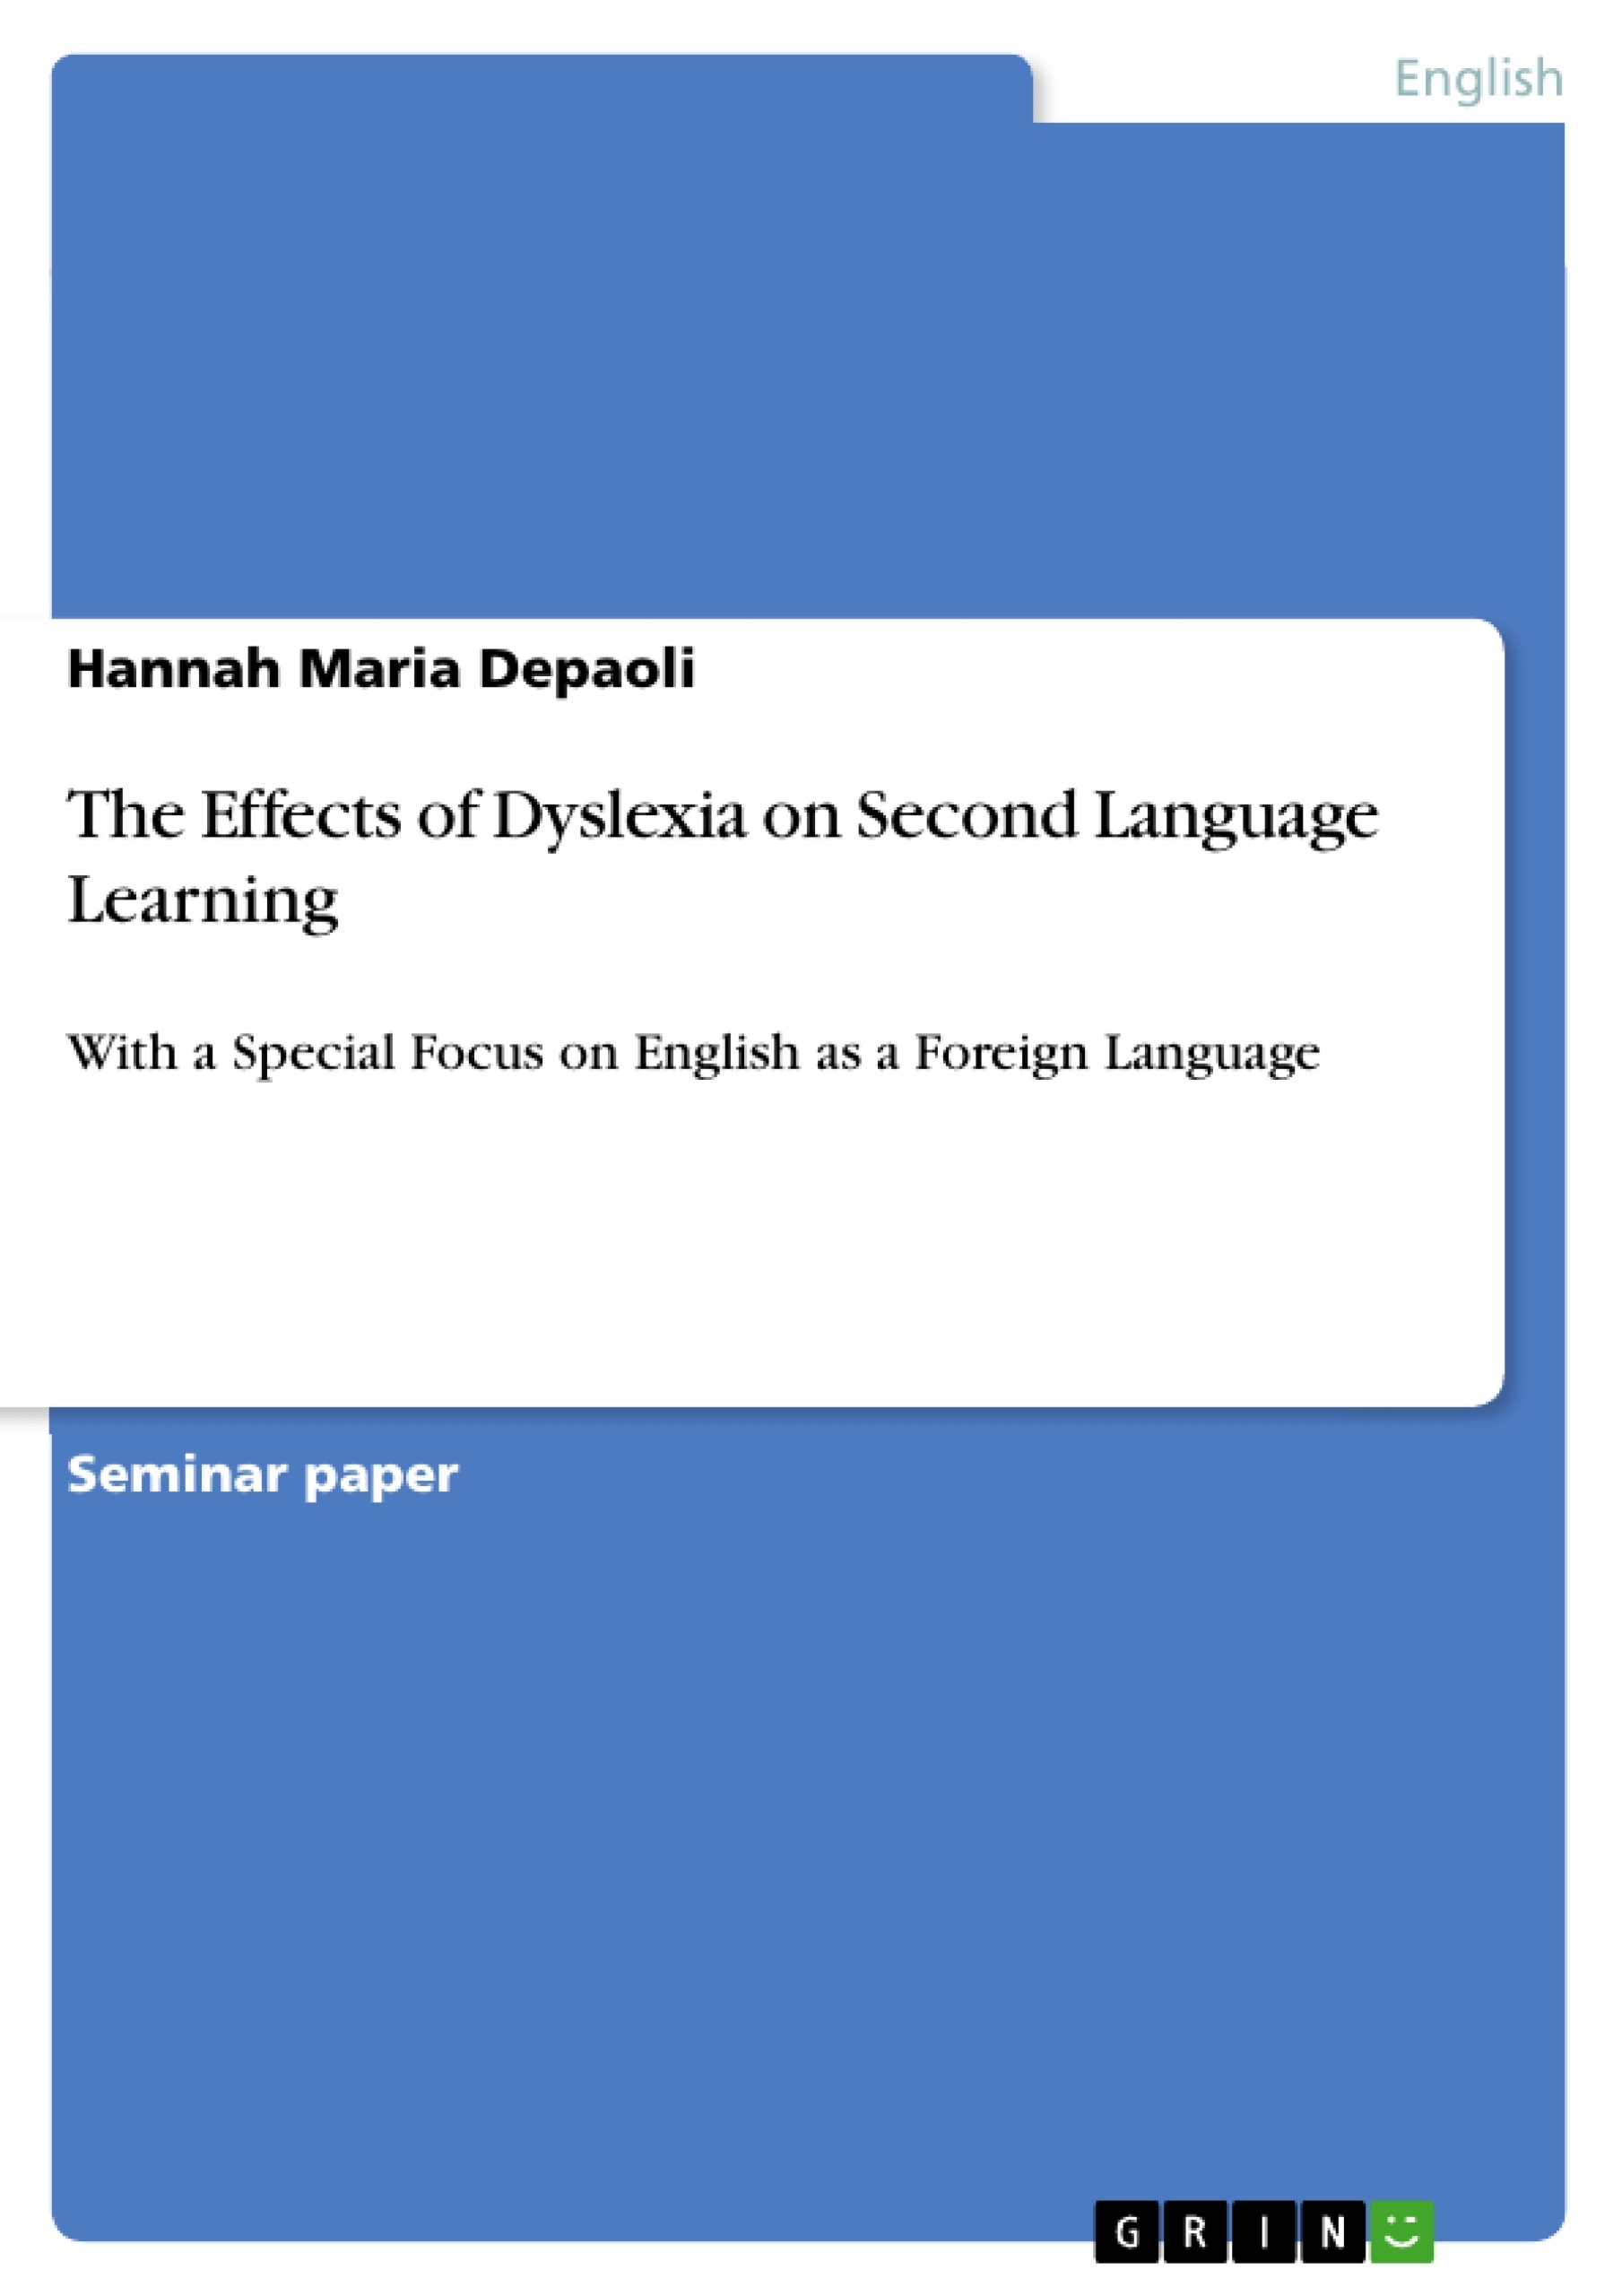 Title: The Effects of Dyslexia on Second Language Learning